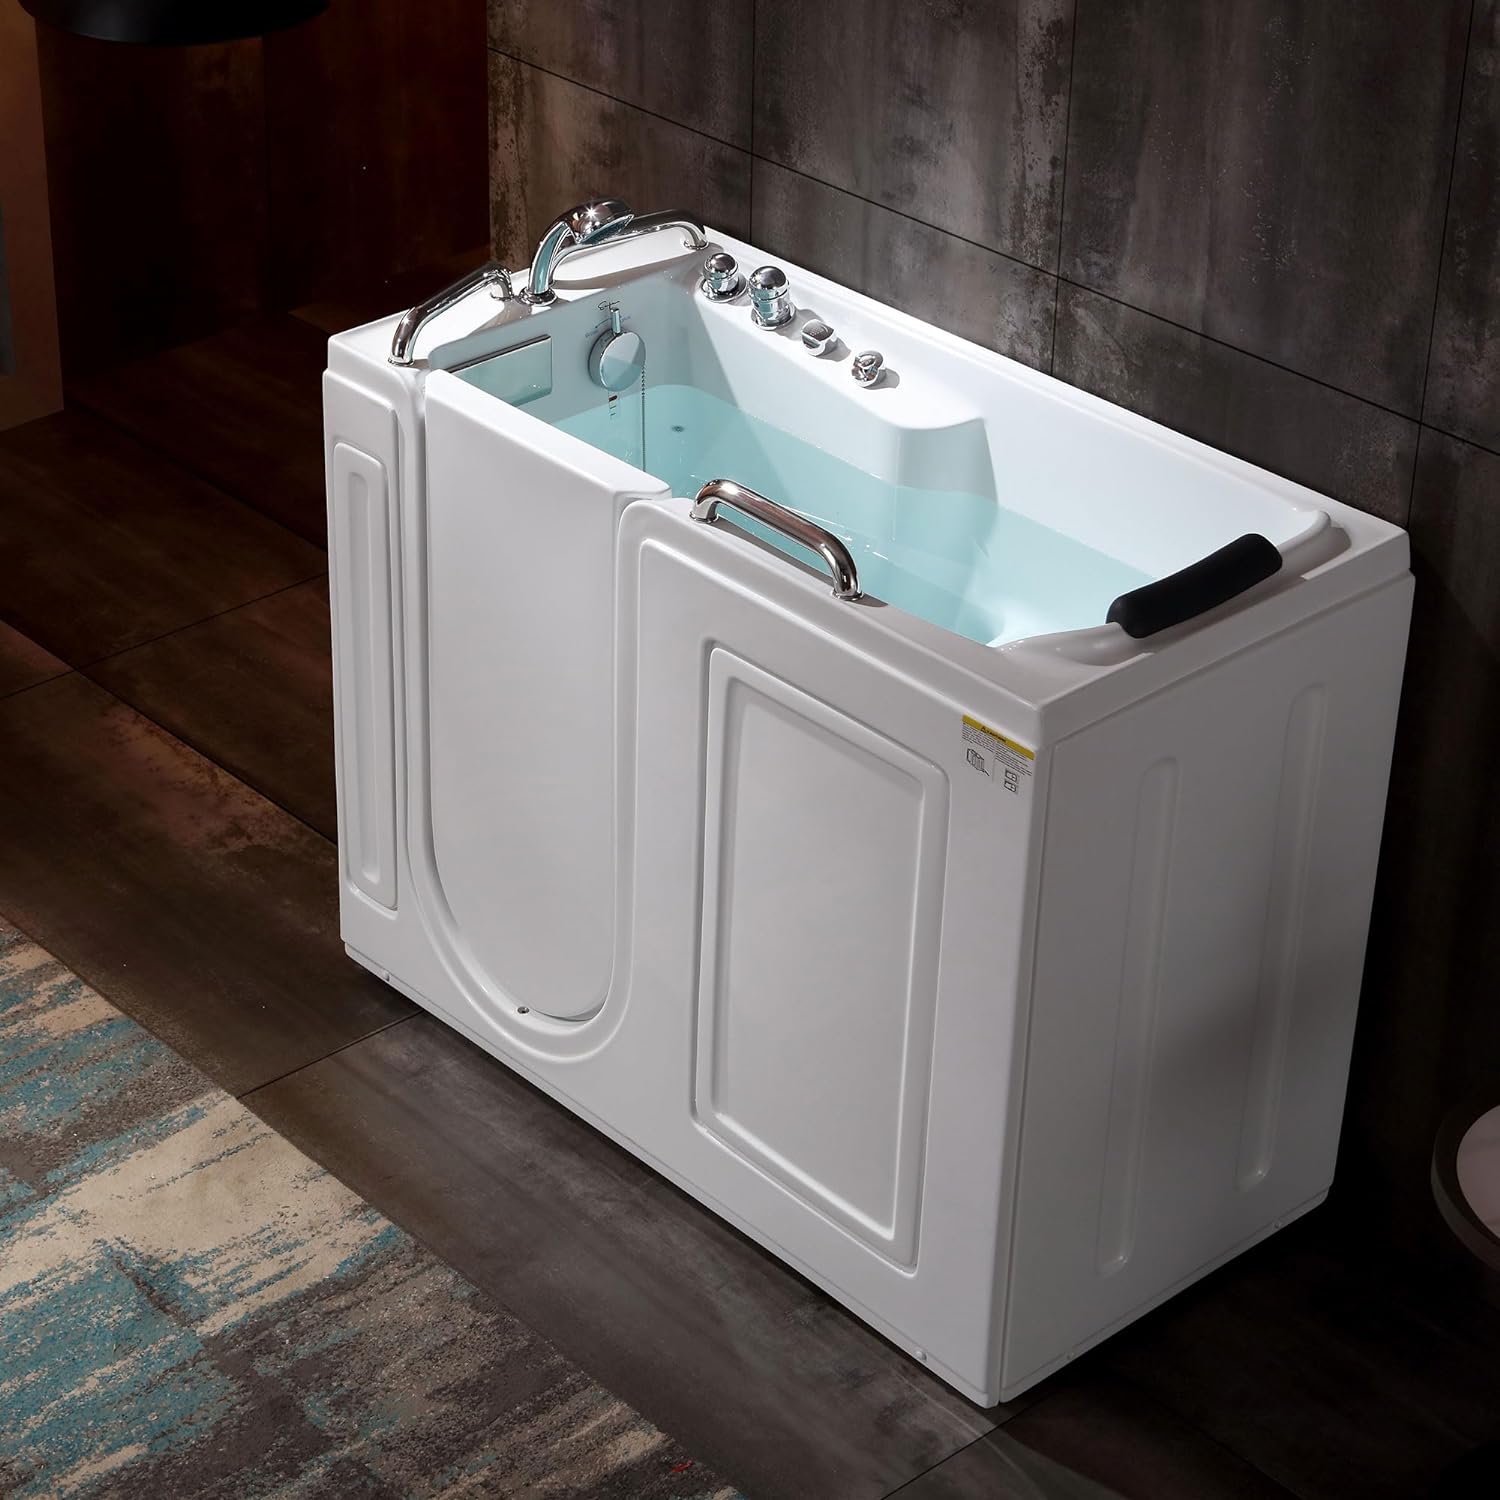 Empava 53″ Acrylic Whirlpool Walk-in Tub Review